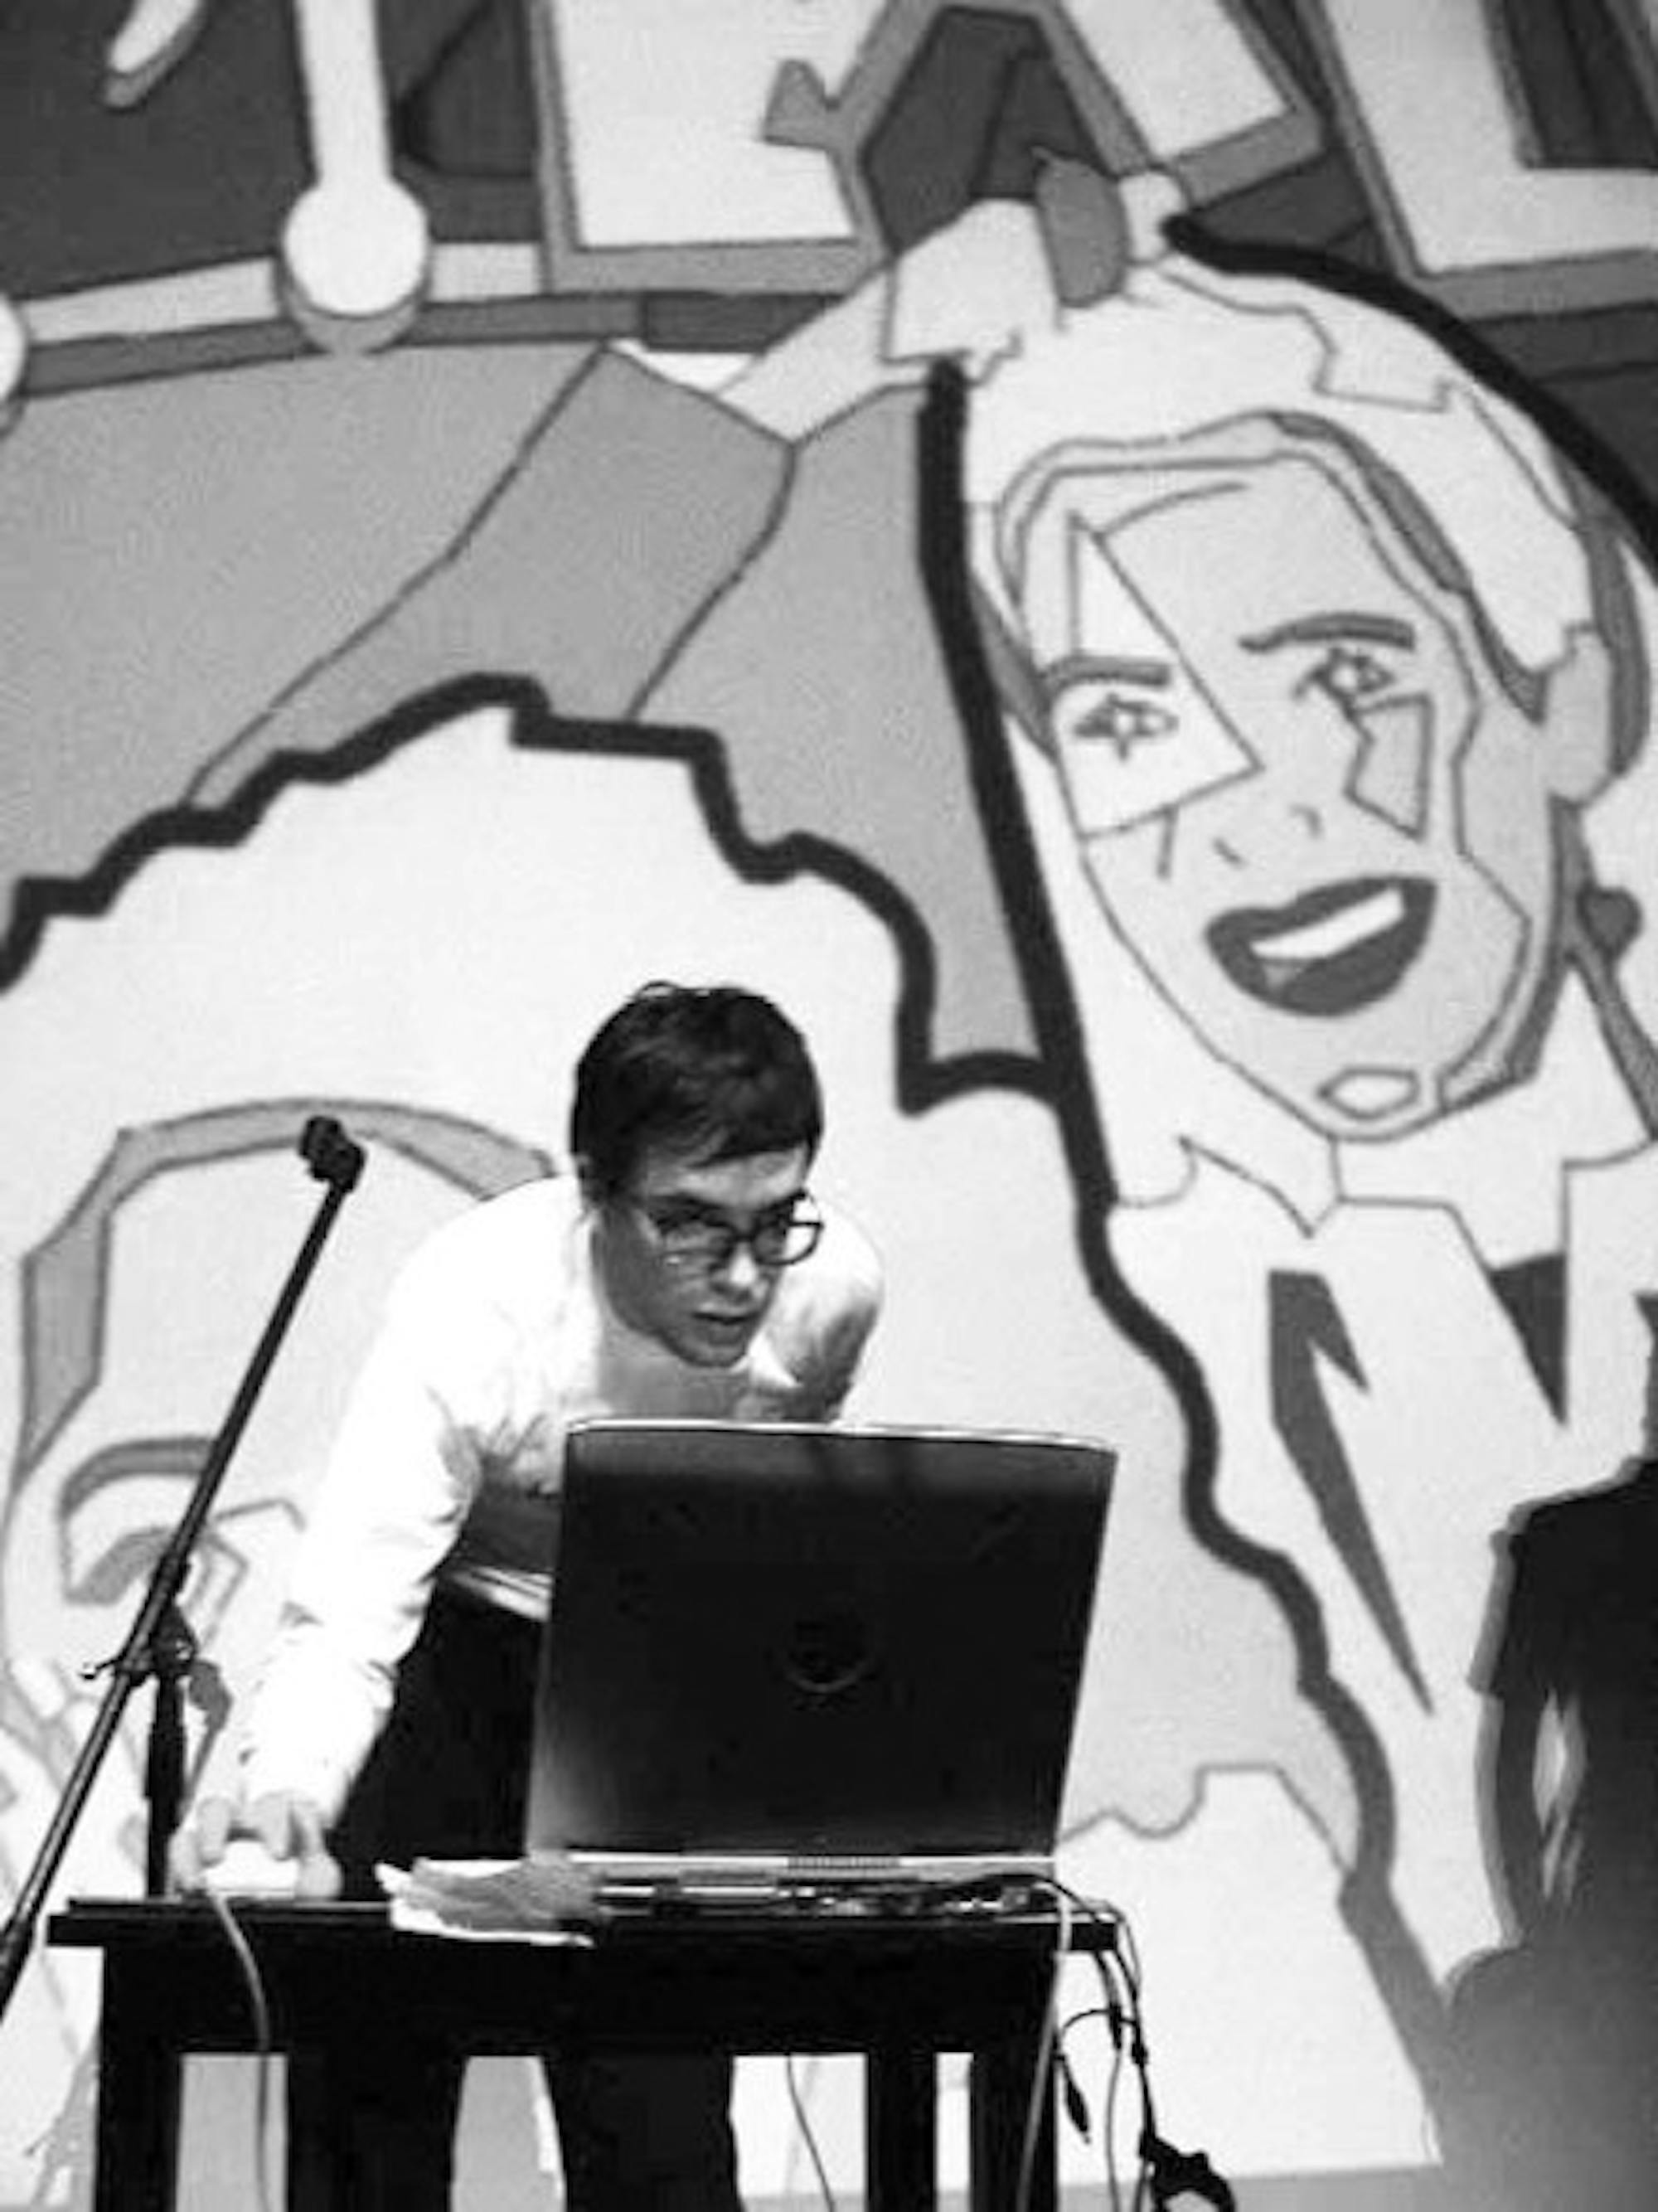 Earlier in his tour, Girl Talk played at the Andy Warhol Museum in Pittsburgh.